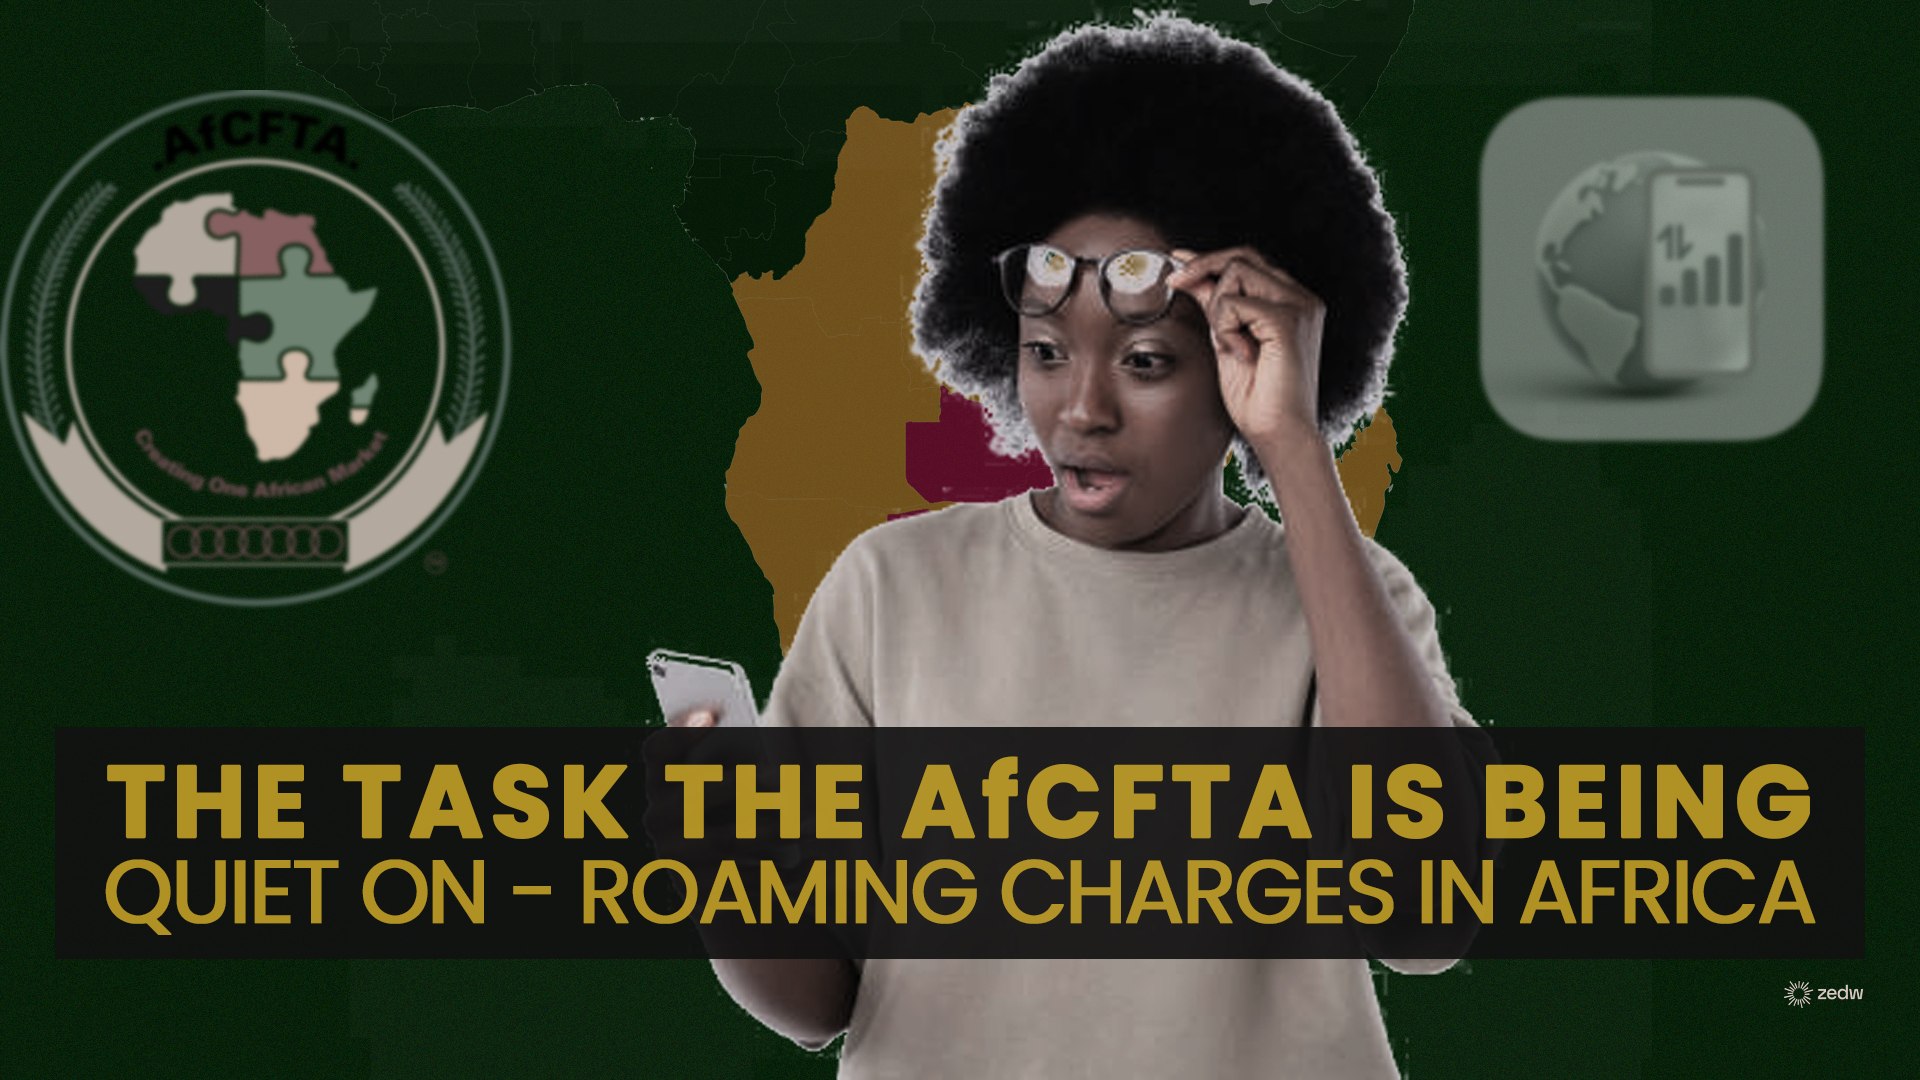 The AfCFTA’s silence on telecoms – Outlook on Mobile Roaming in Africa